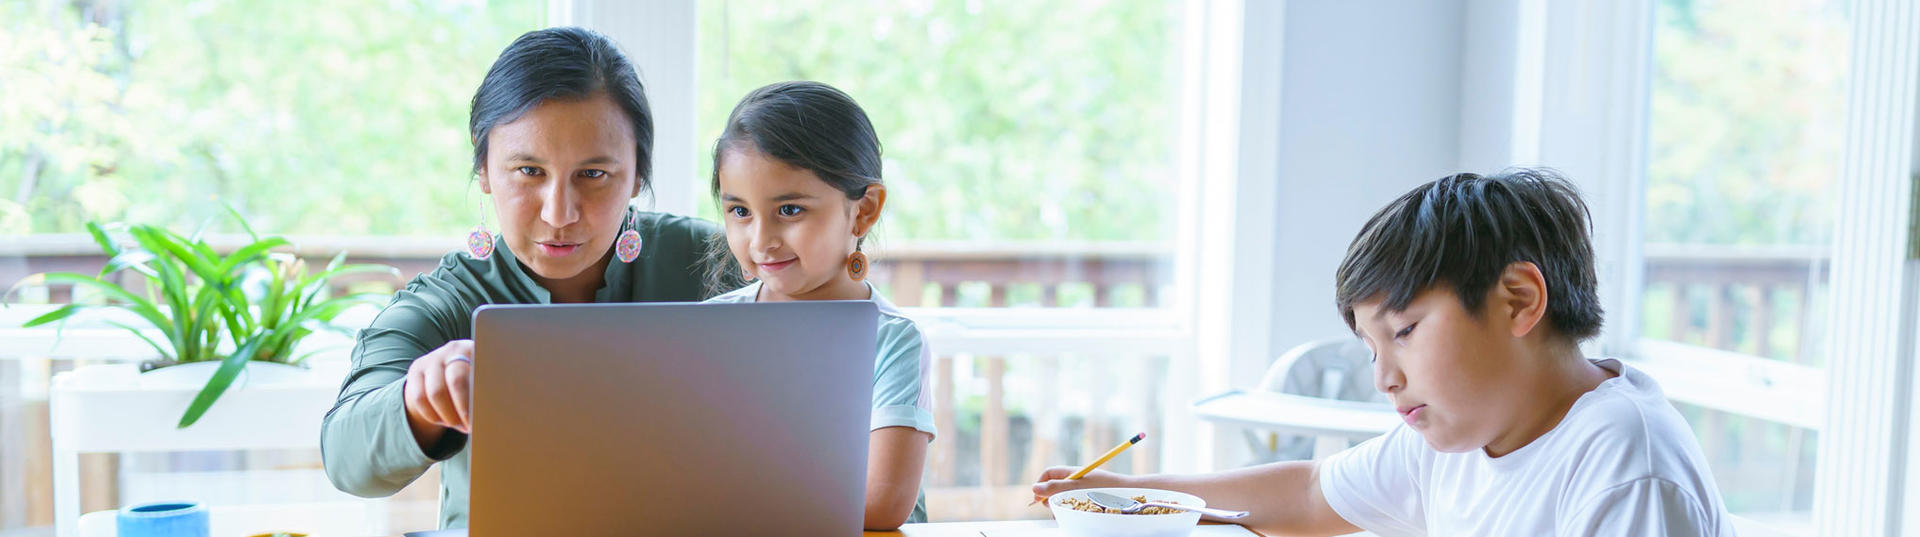 Elementary age boy working on school assignment at home